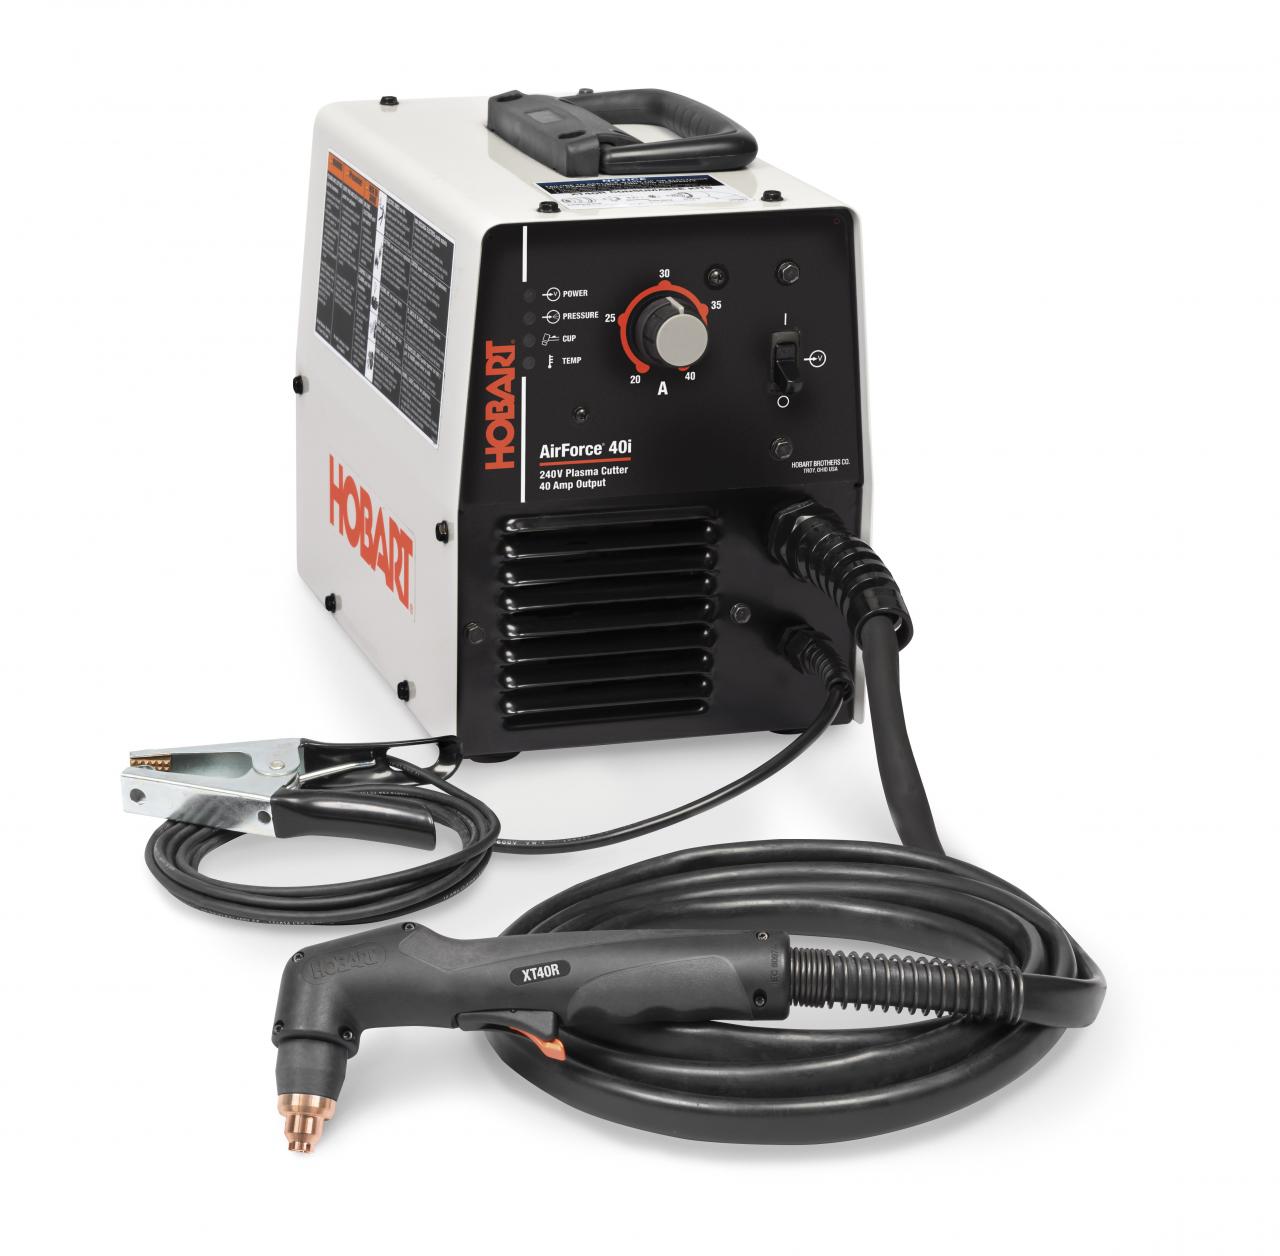 Manual plasma cutter - AirForce™ 40i - Hobart - automated / inverter type /  hand-held